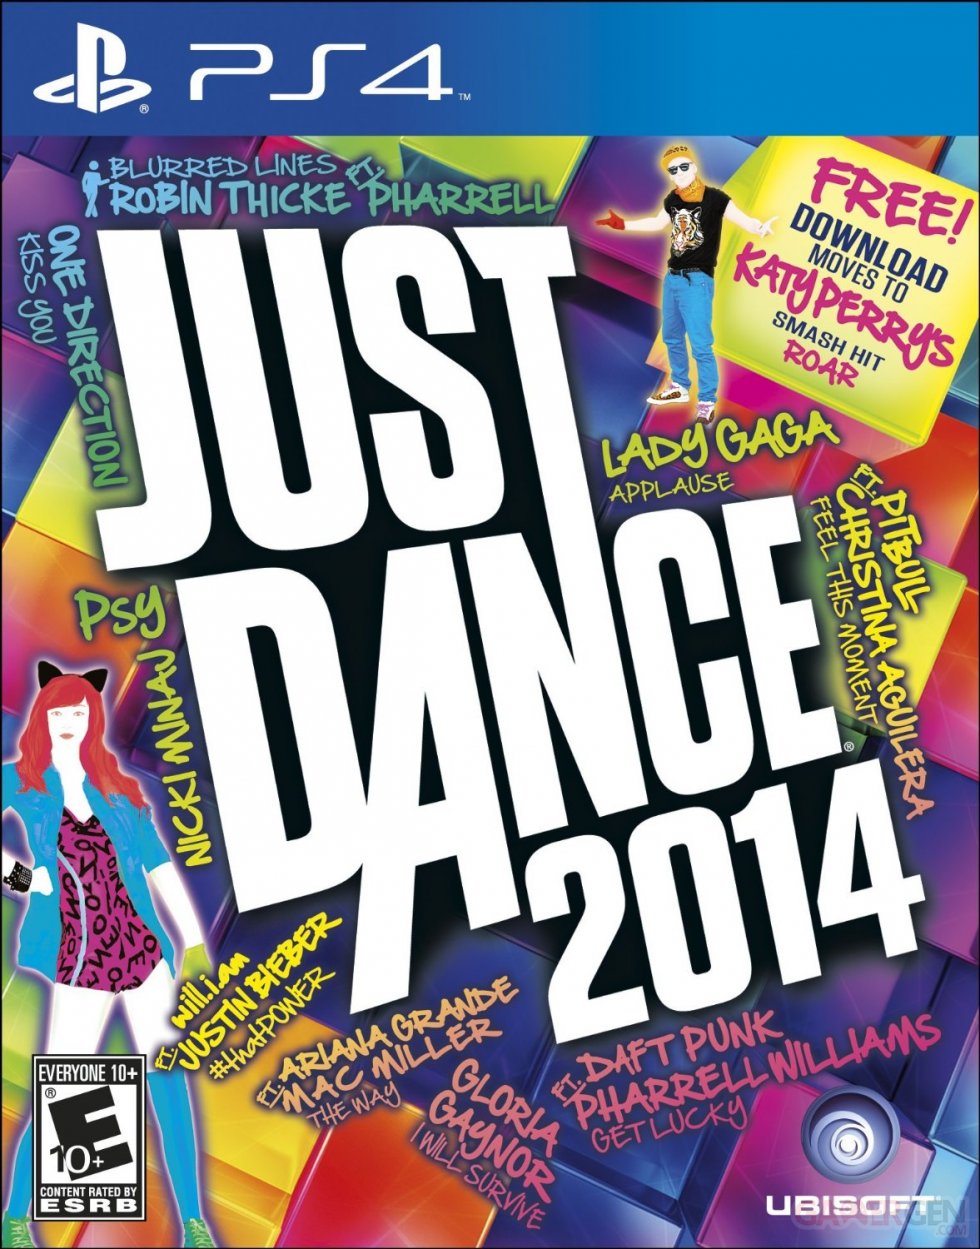 just-dance-14-cover-boxart-jaquette-ps4